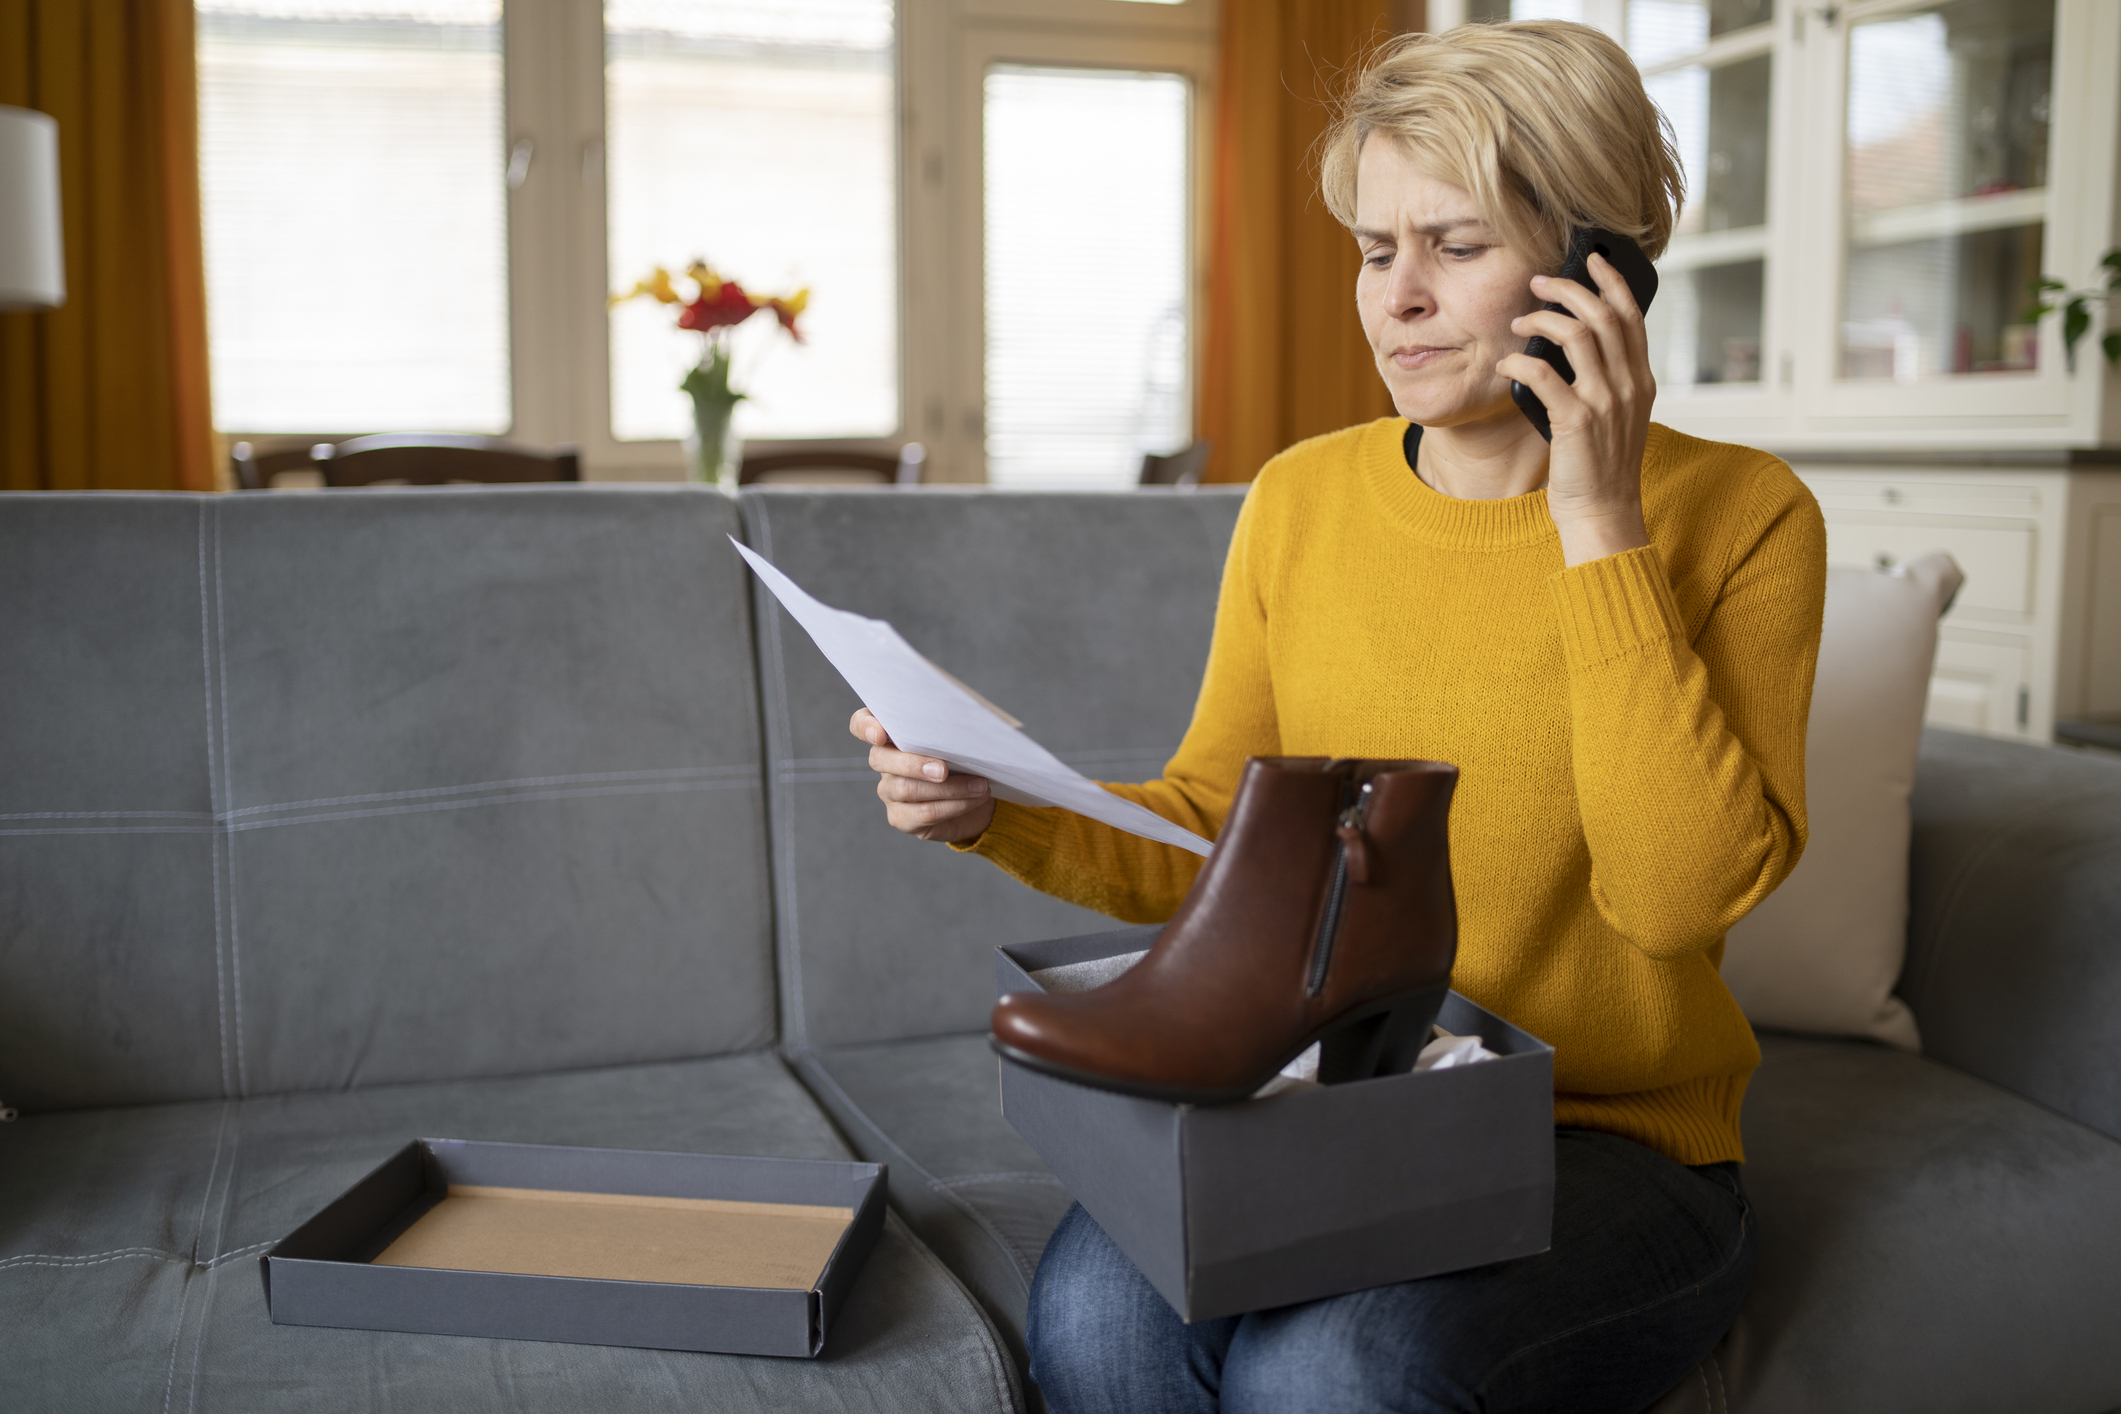 An dissatisfied customer is looking at the delivery note from her online shopping order, using her mobile phone, the new purchase of boots on in the box on her knee while she sits in the living room on her sofa